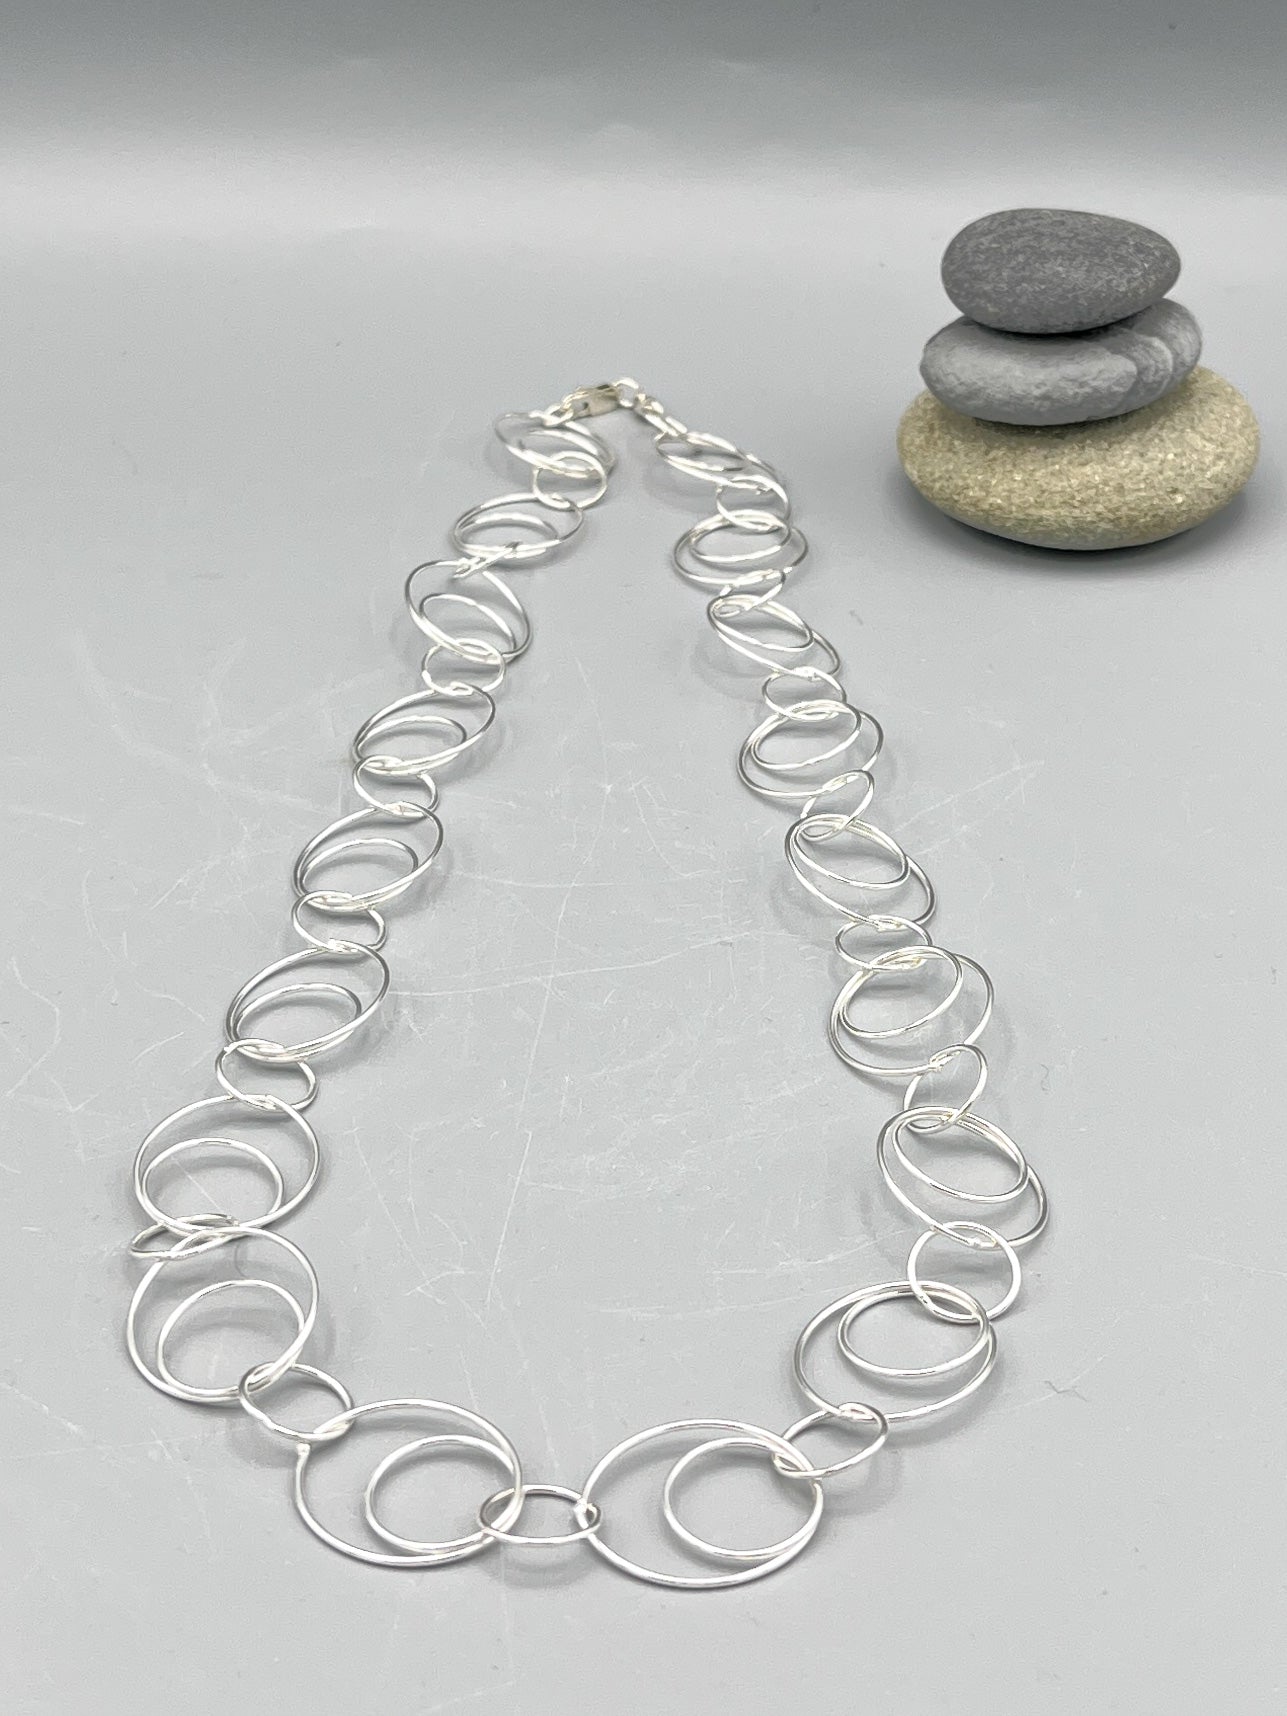 Sterling Silver Necklace. 19” (480mm) long polished round ring necklace